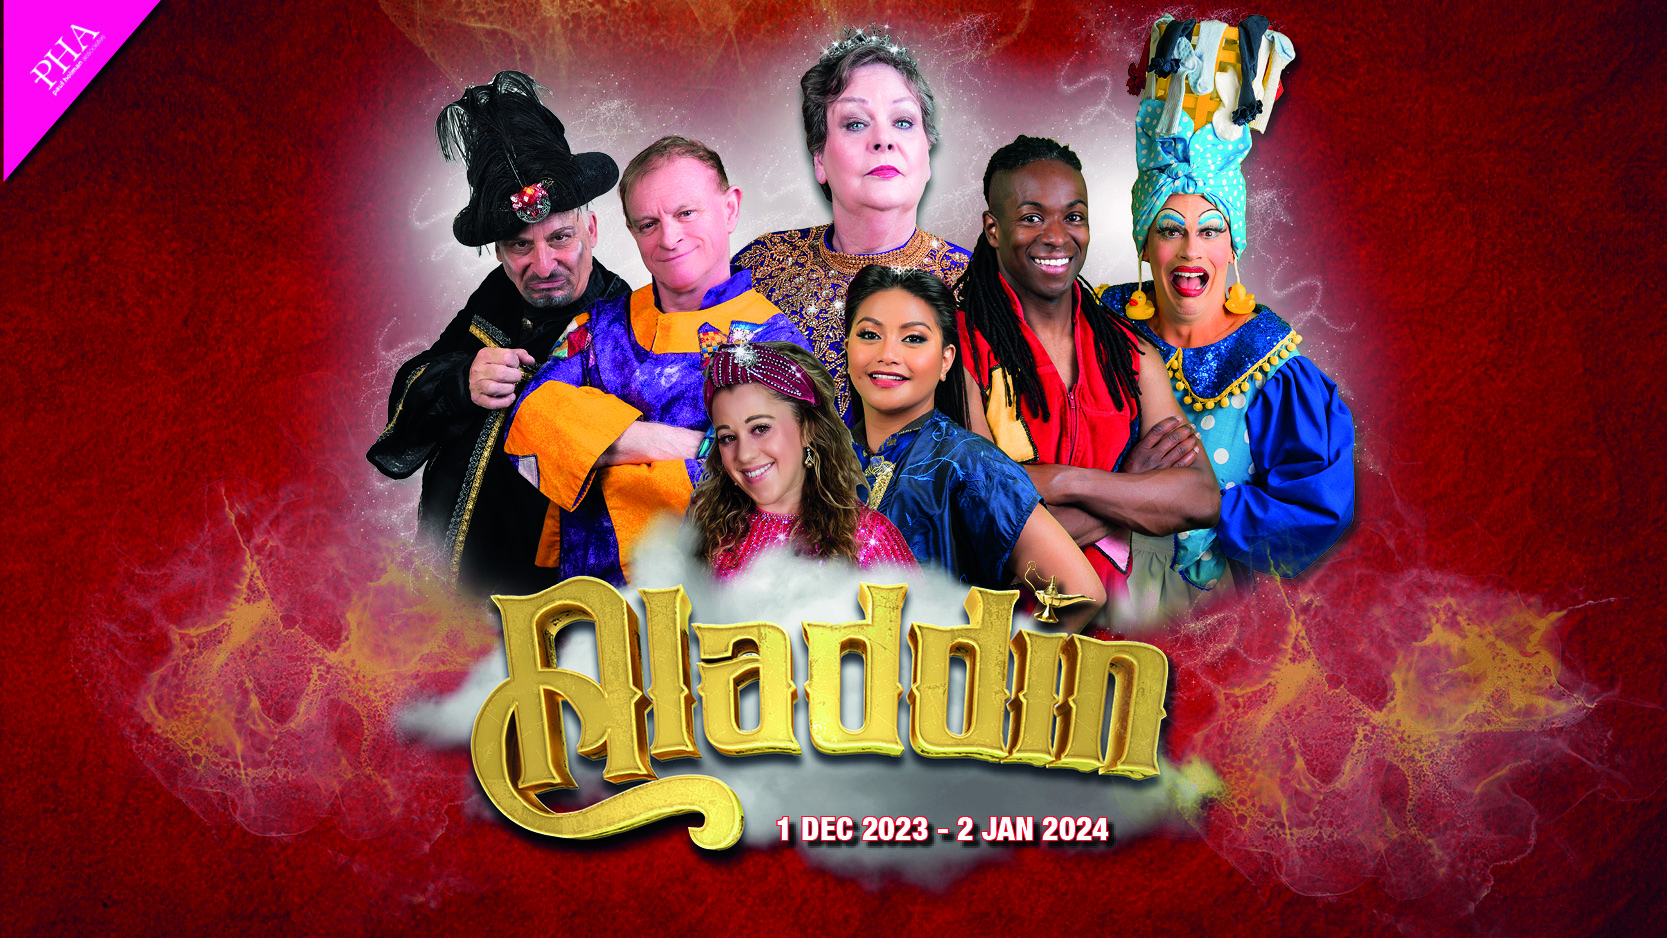 The cast of Aladdin Panto against a smoky red background with gold text reading 'Aladdin'